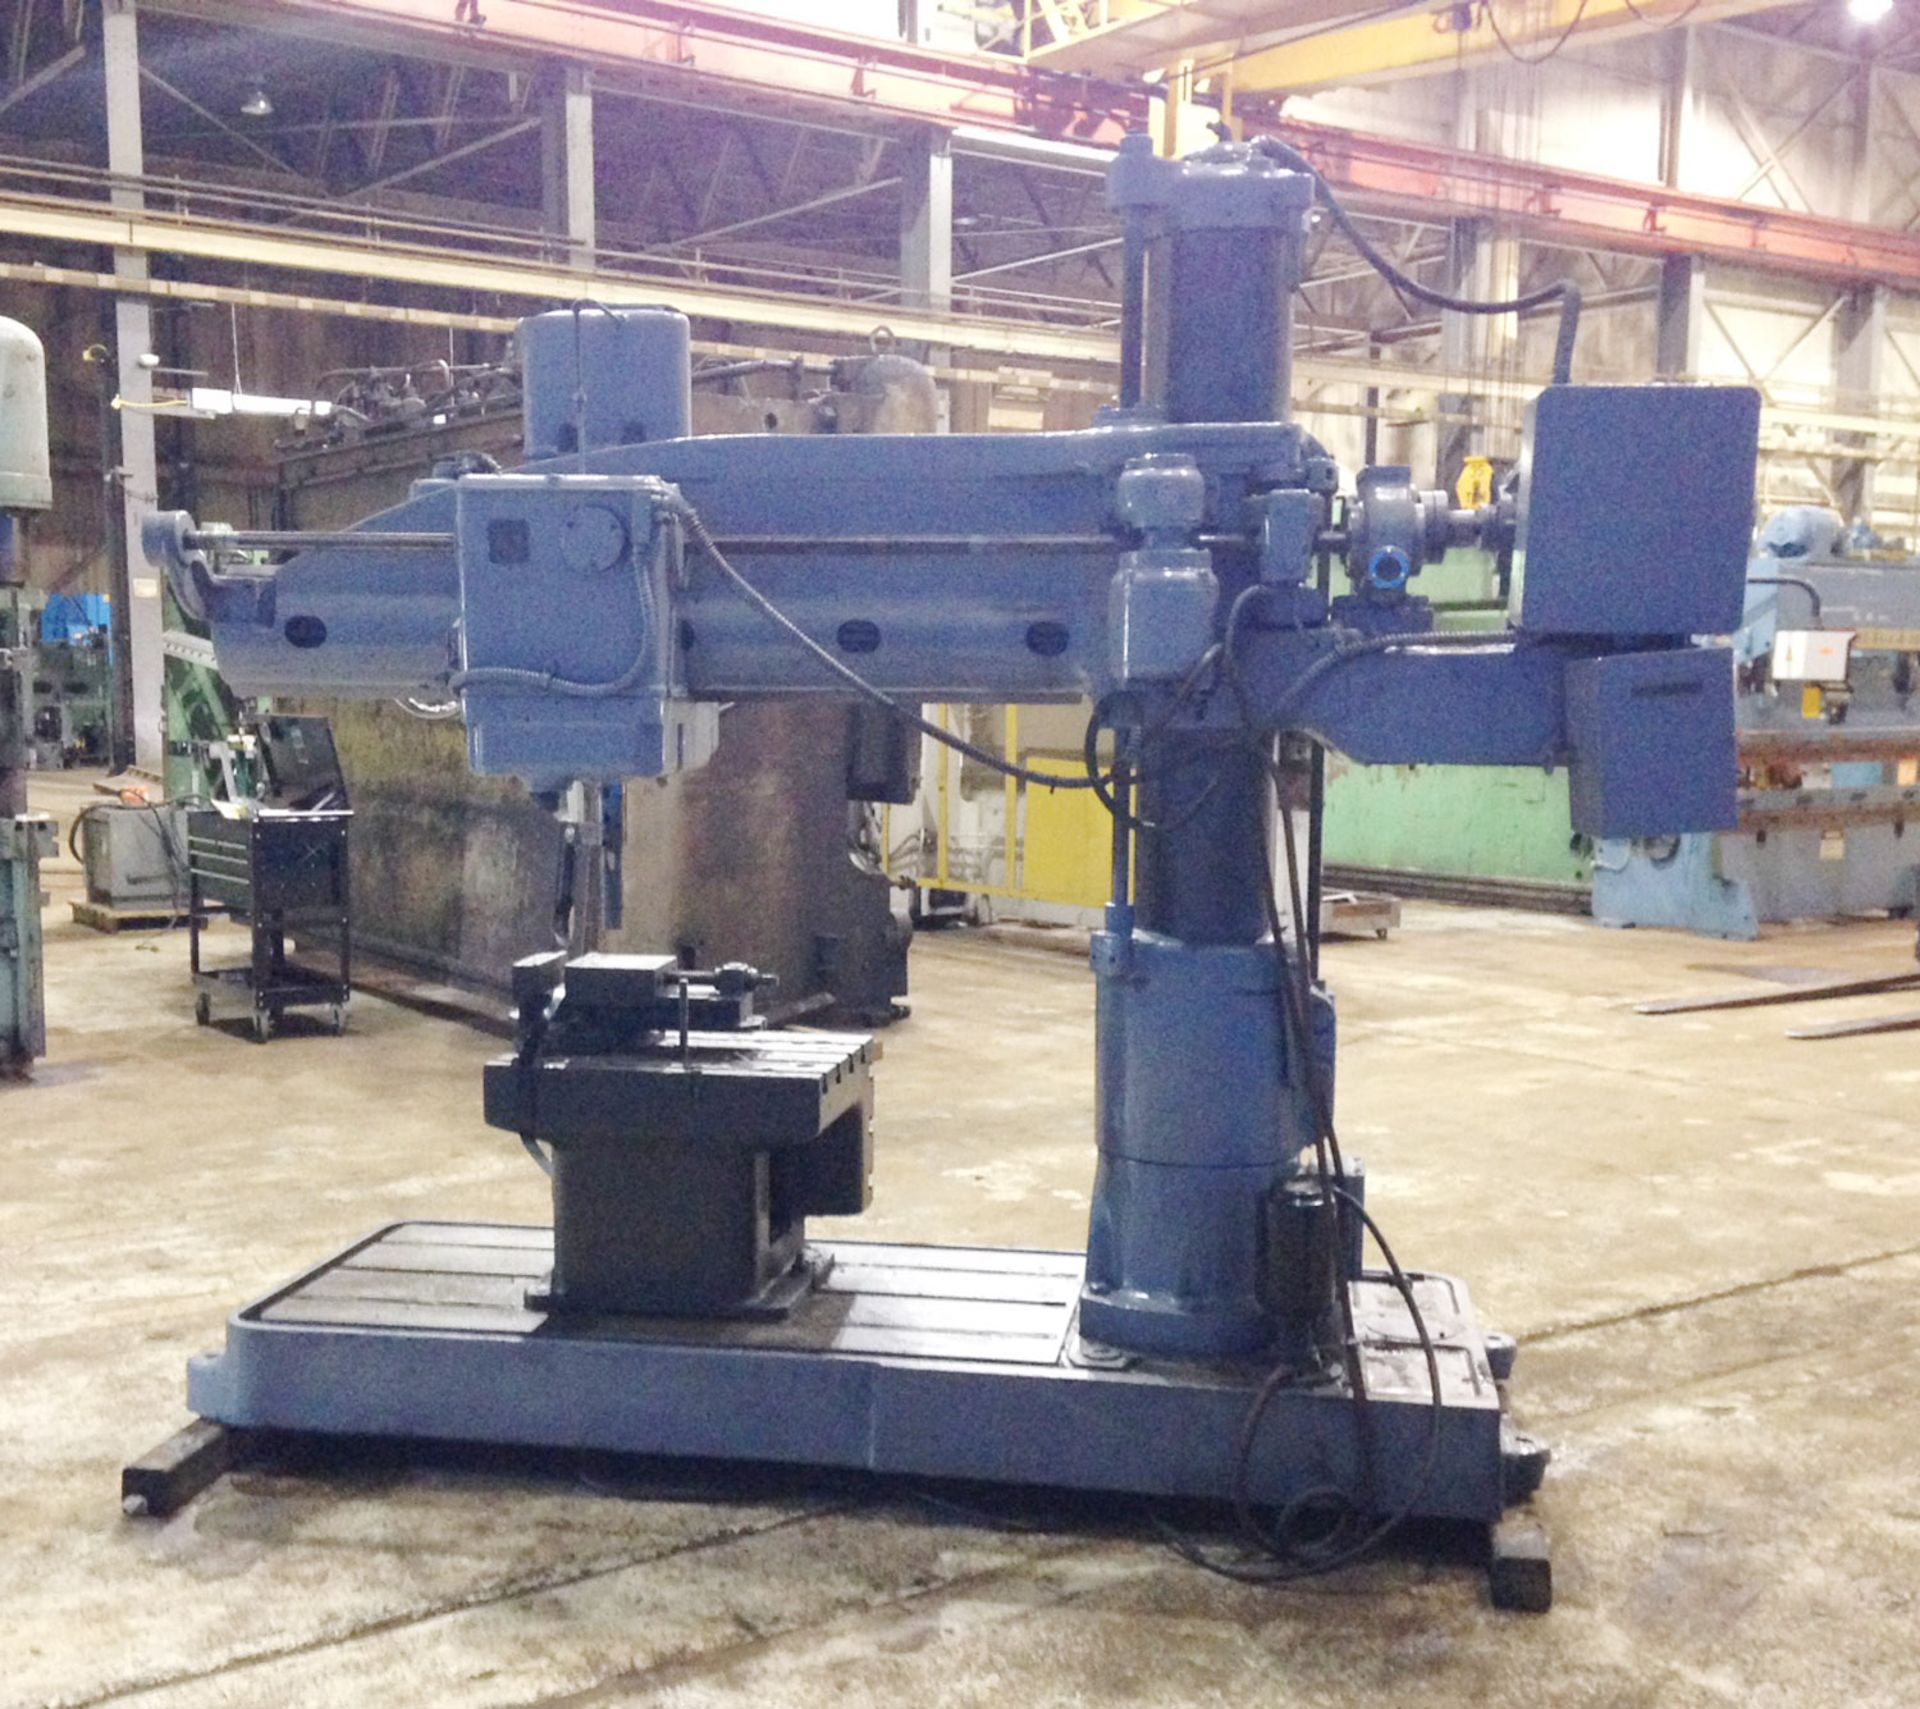 FREE LOADING - Located In: Painesville, OH - Carlton Radial Arm Drill, 5' x 11", Mdl: 1A, S/N: 1254 - Image 5 of 6